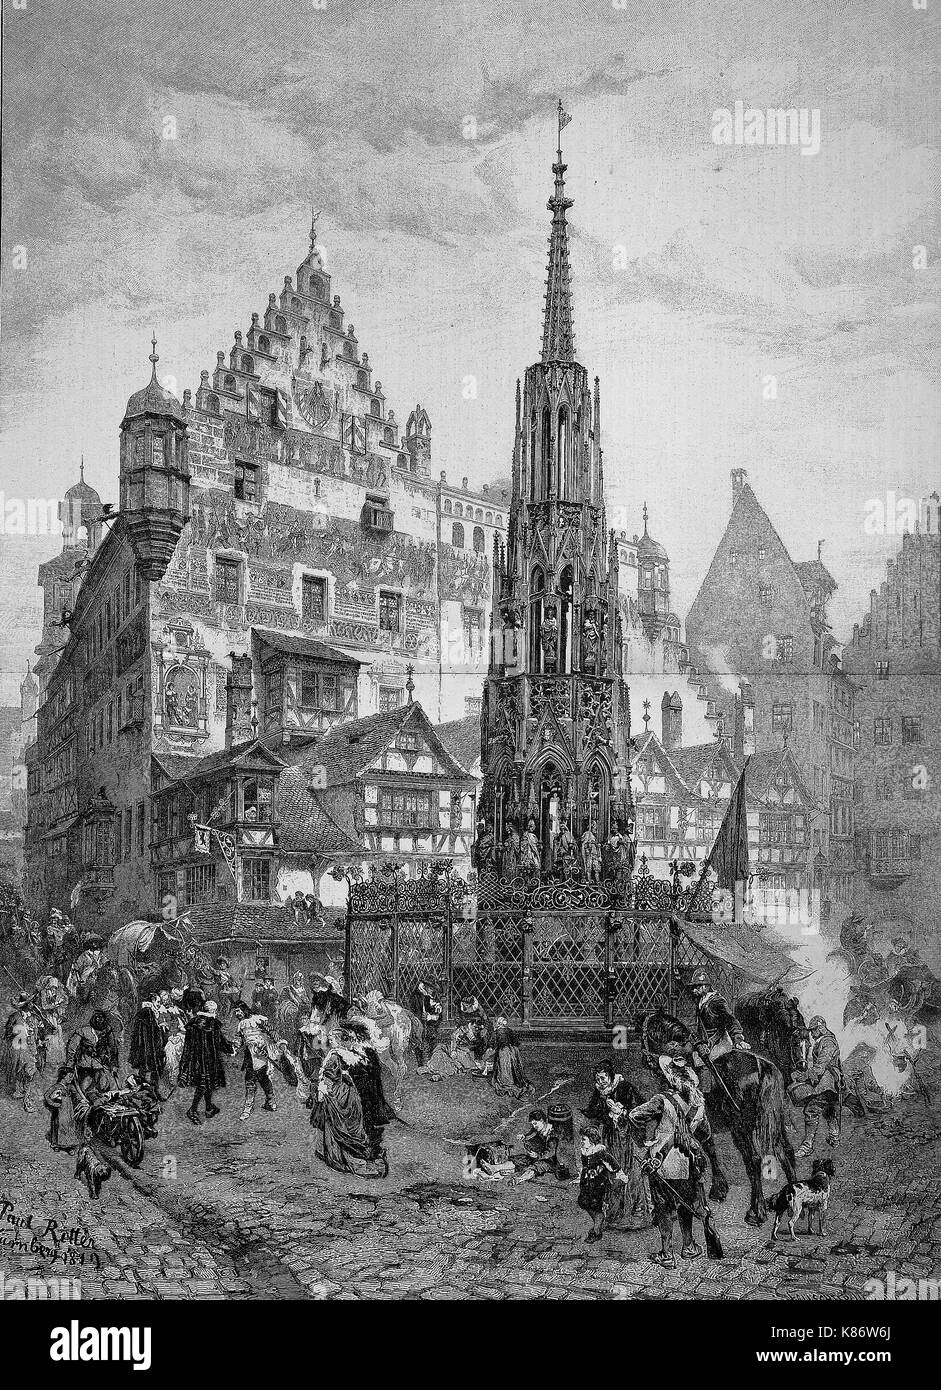 the Schoener Brunnen, fountain, at the market of Nuremberg, Bavaria, Germany, 1819, Digital improved reproduction of an original woodprint from the 19th century Stock Photo